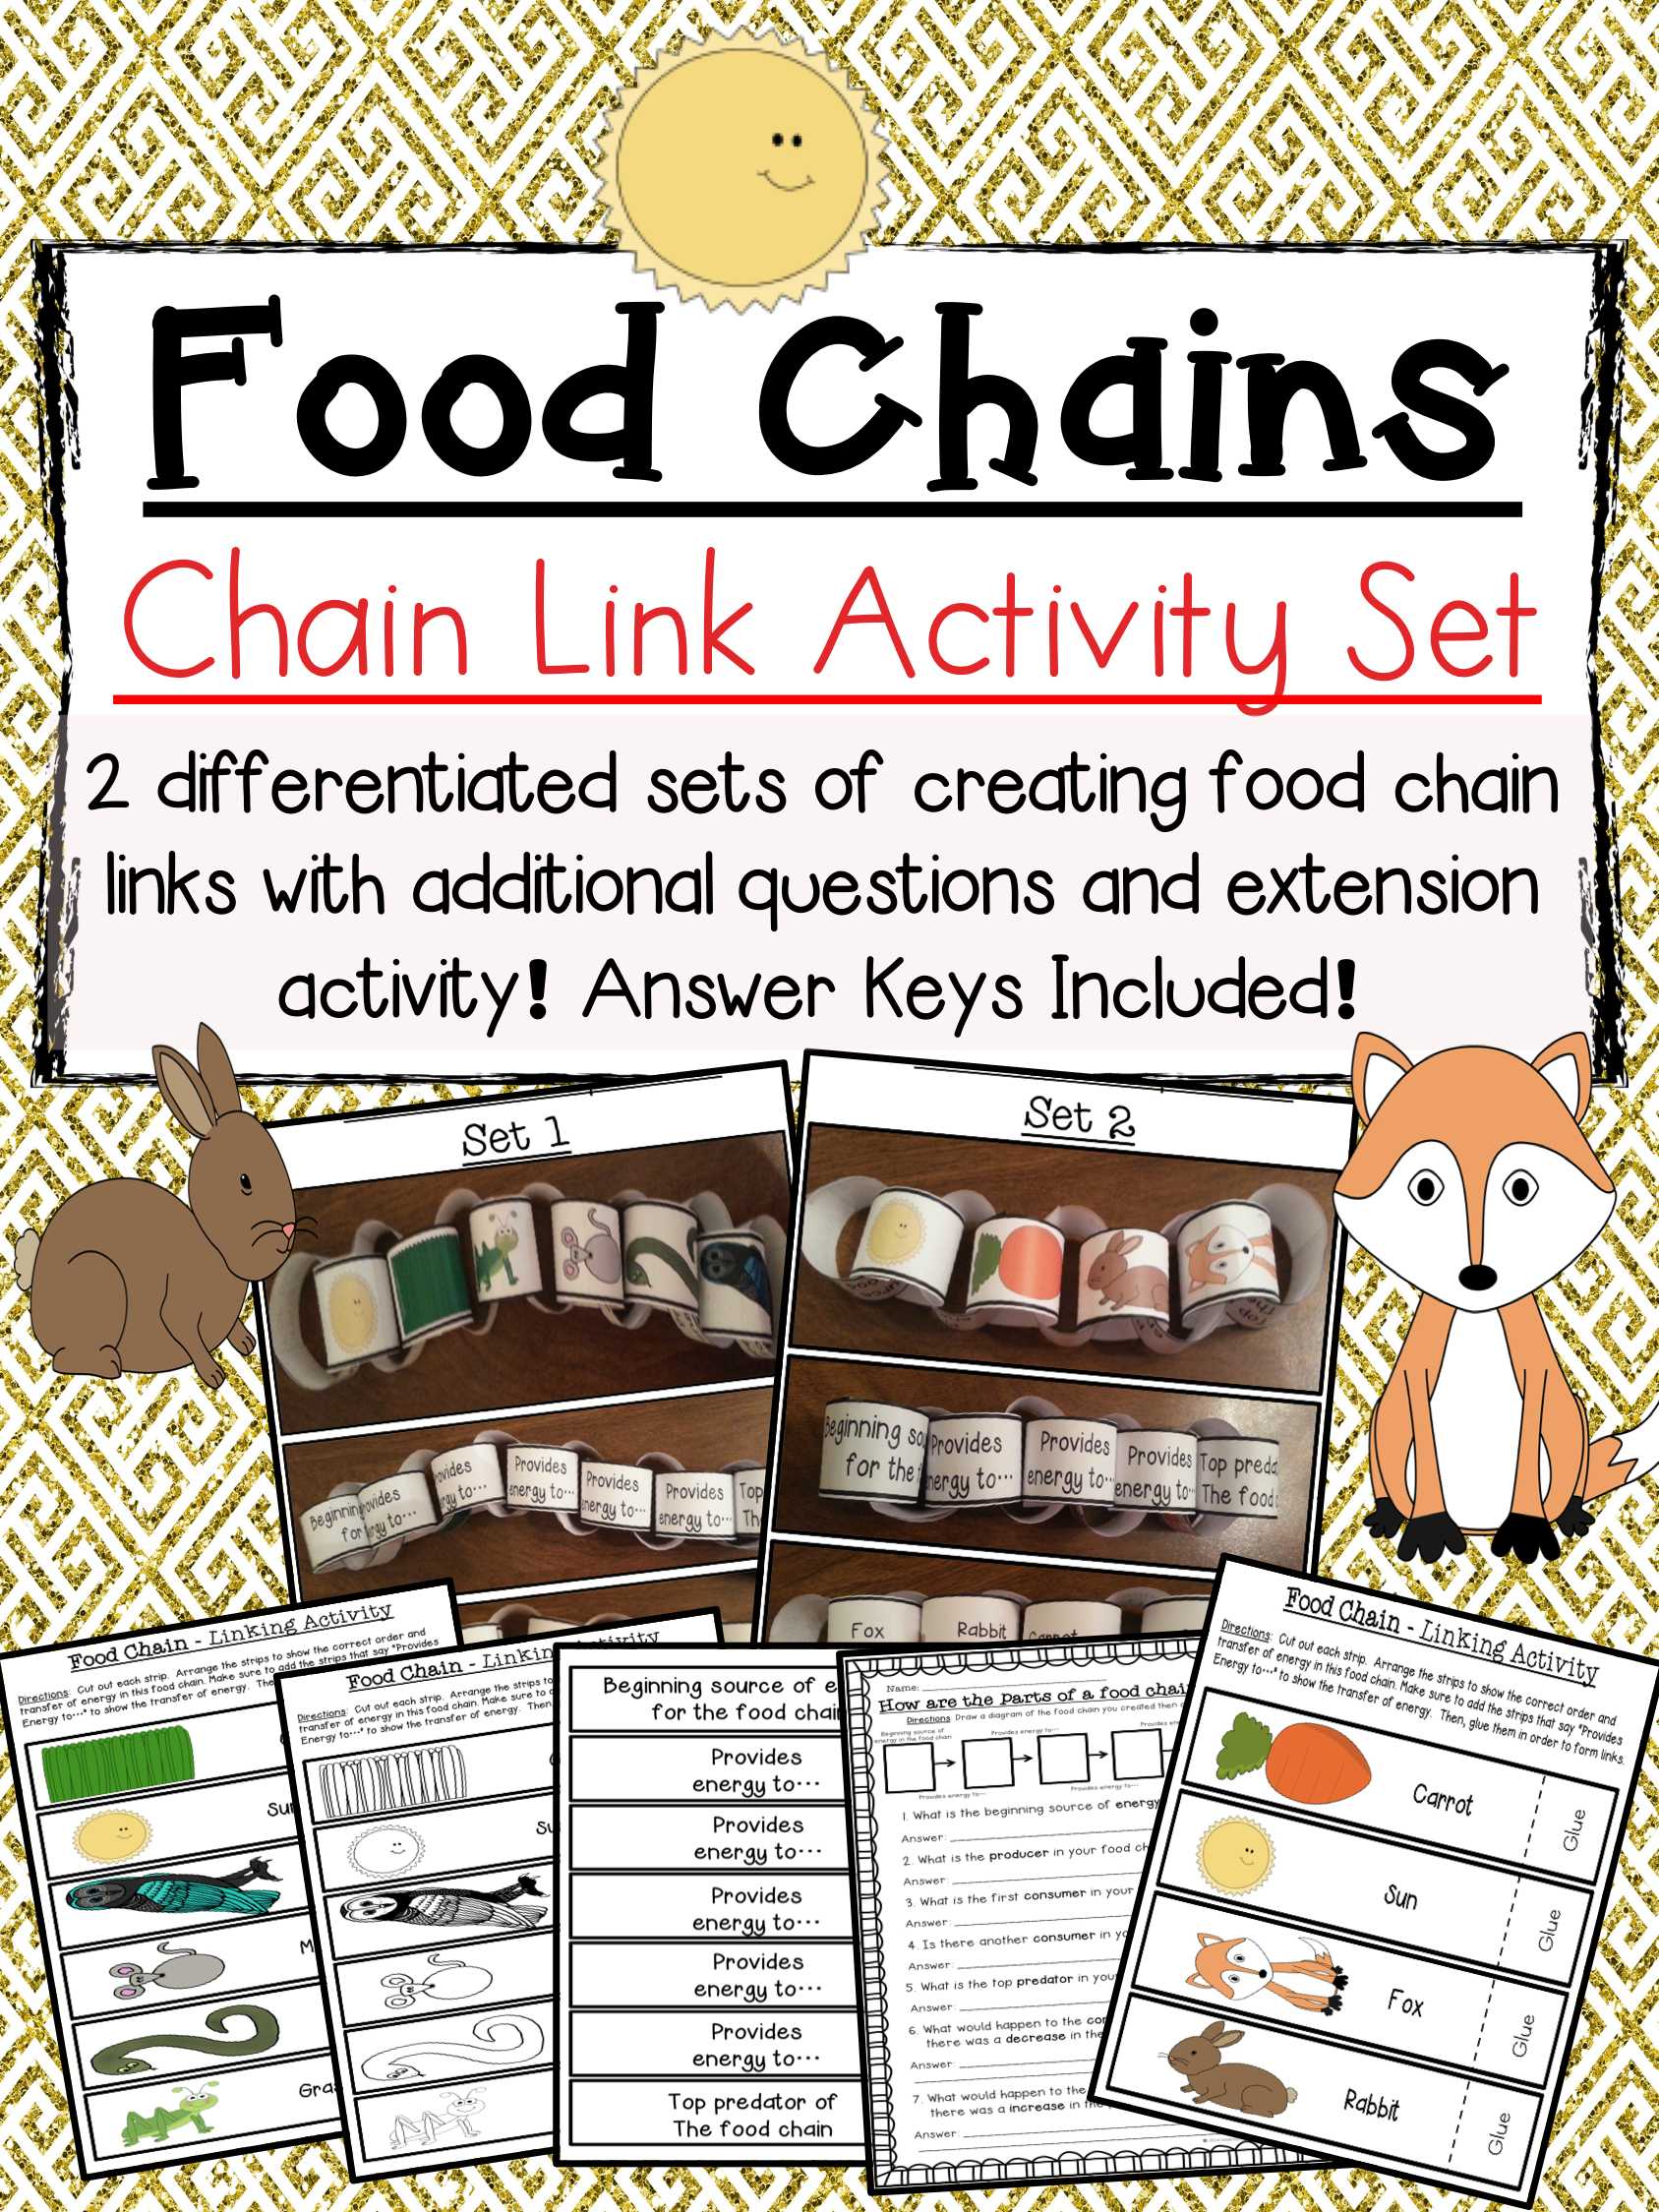 Energy Transfer In the atmosphere Worksheet Answers Along with Food Chain Links Activity Set Pinterest